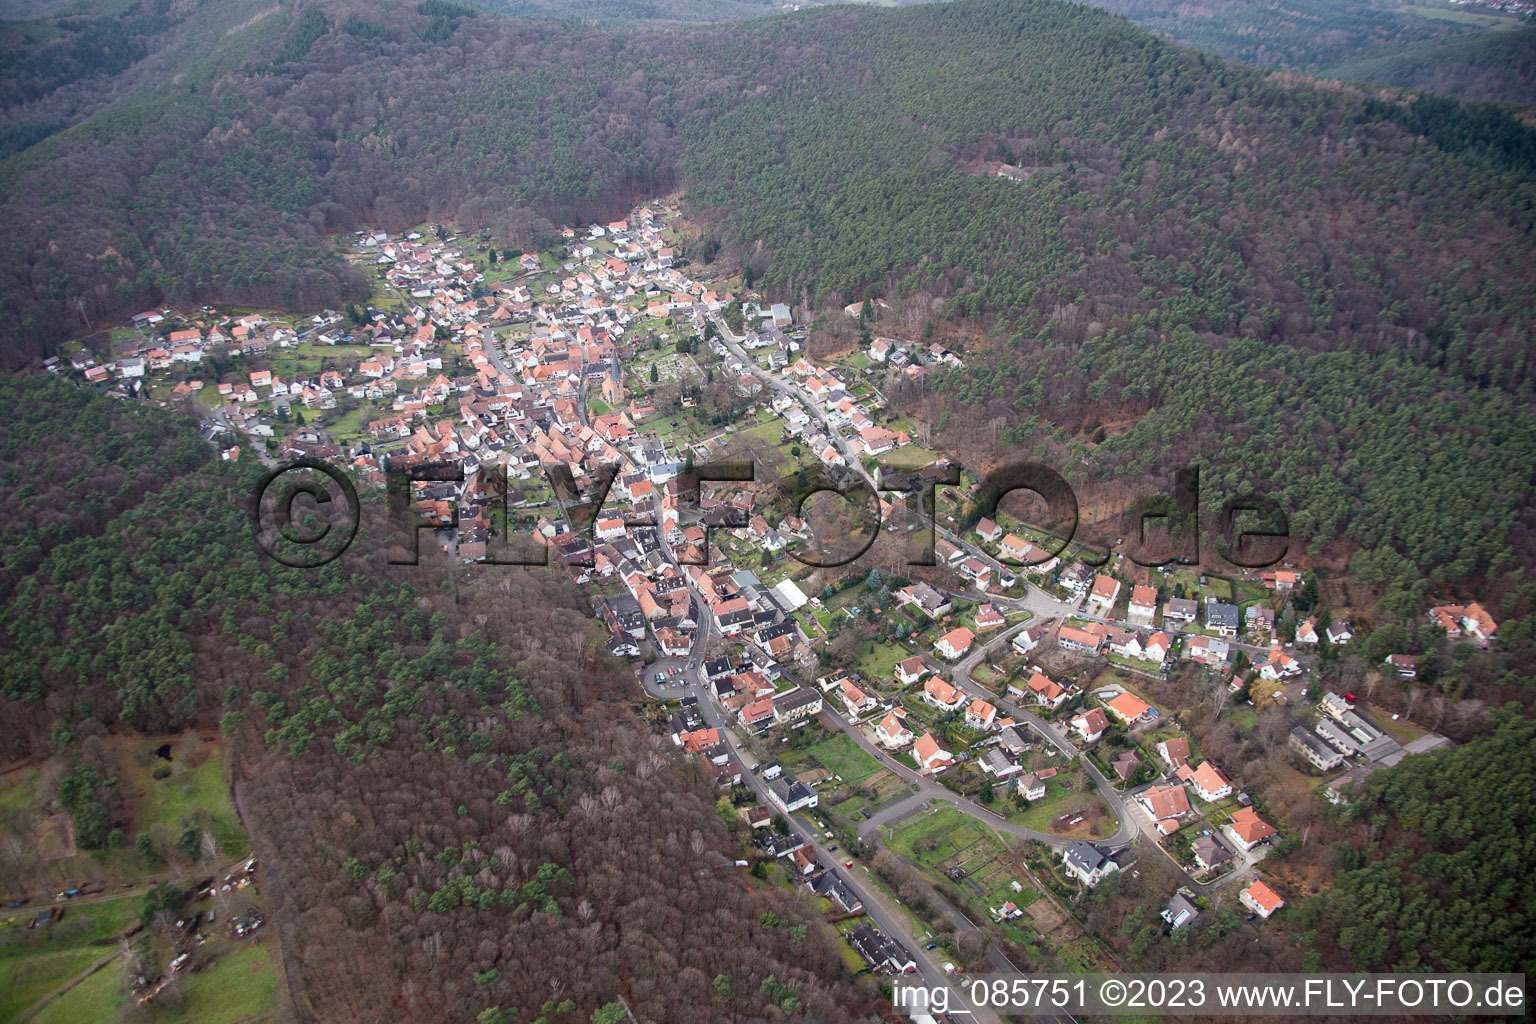 Dörrenbach in the state Rhineland-Palatinate, Germany from a drone